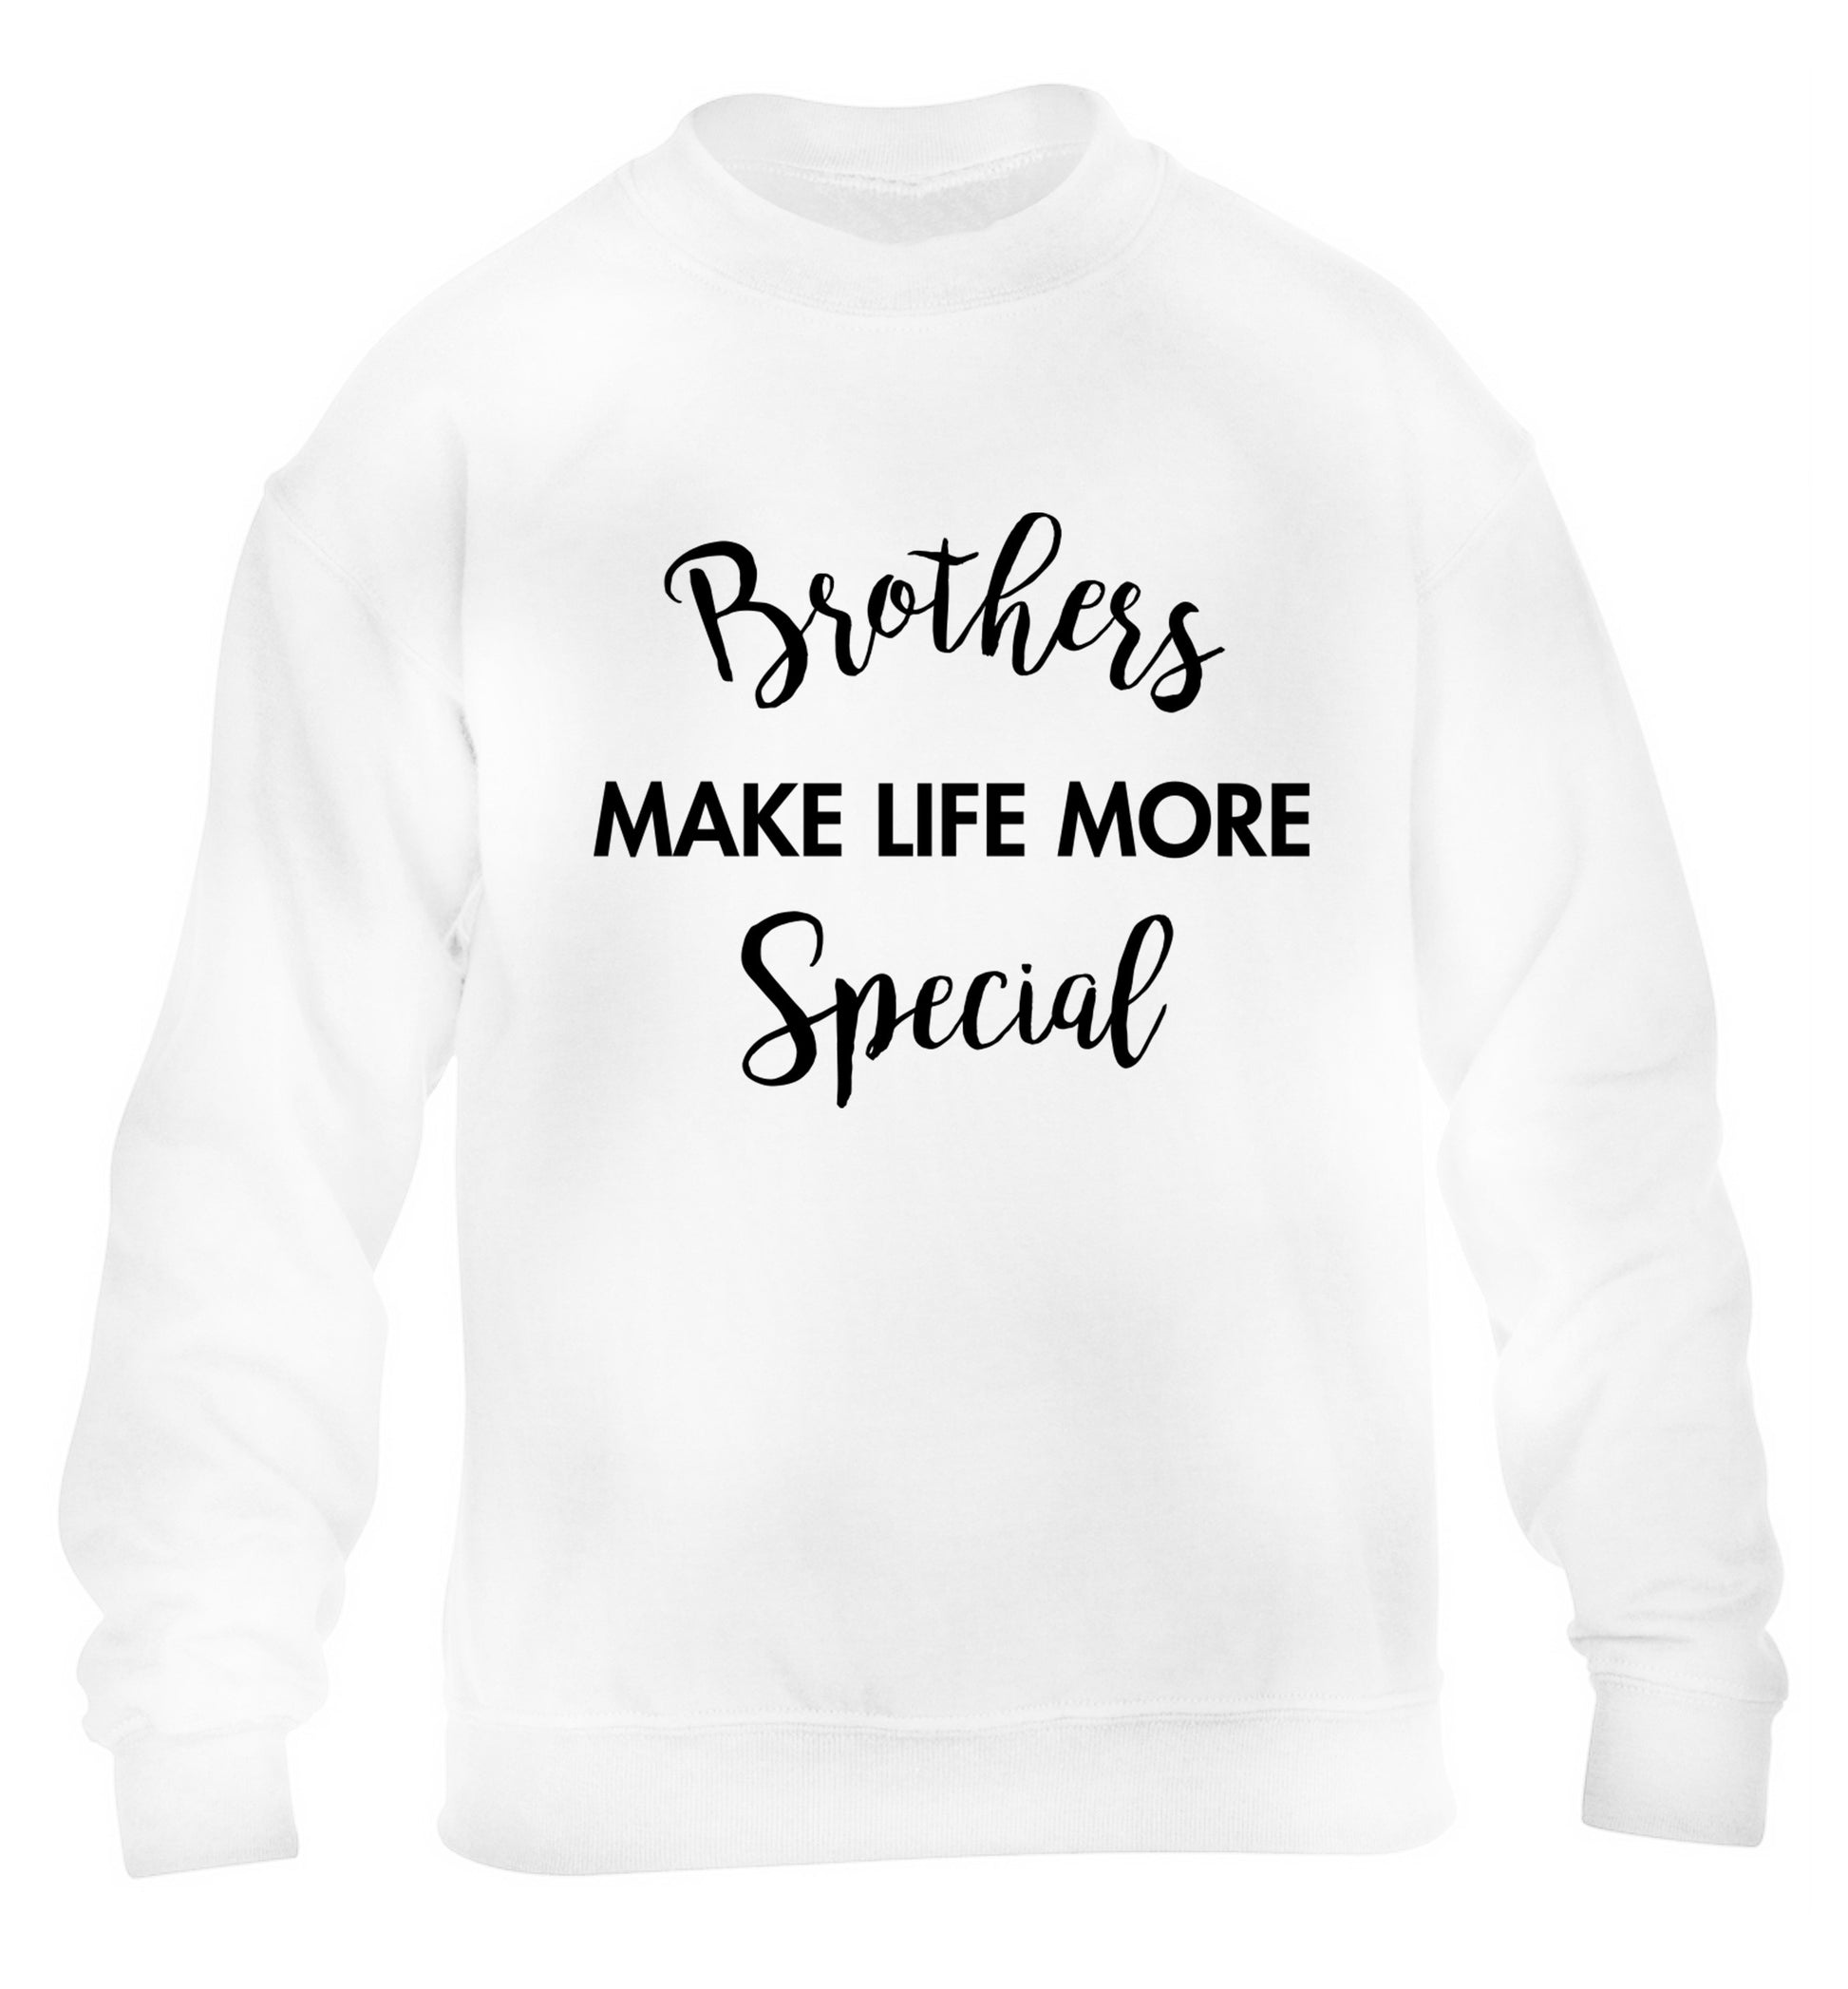 Brothers make life more special children's white sweater 12-14 Years